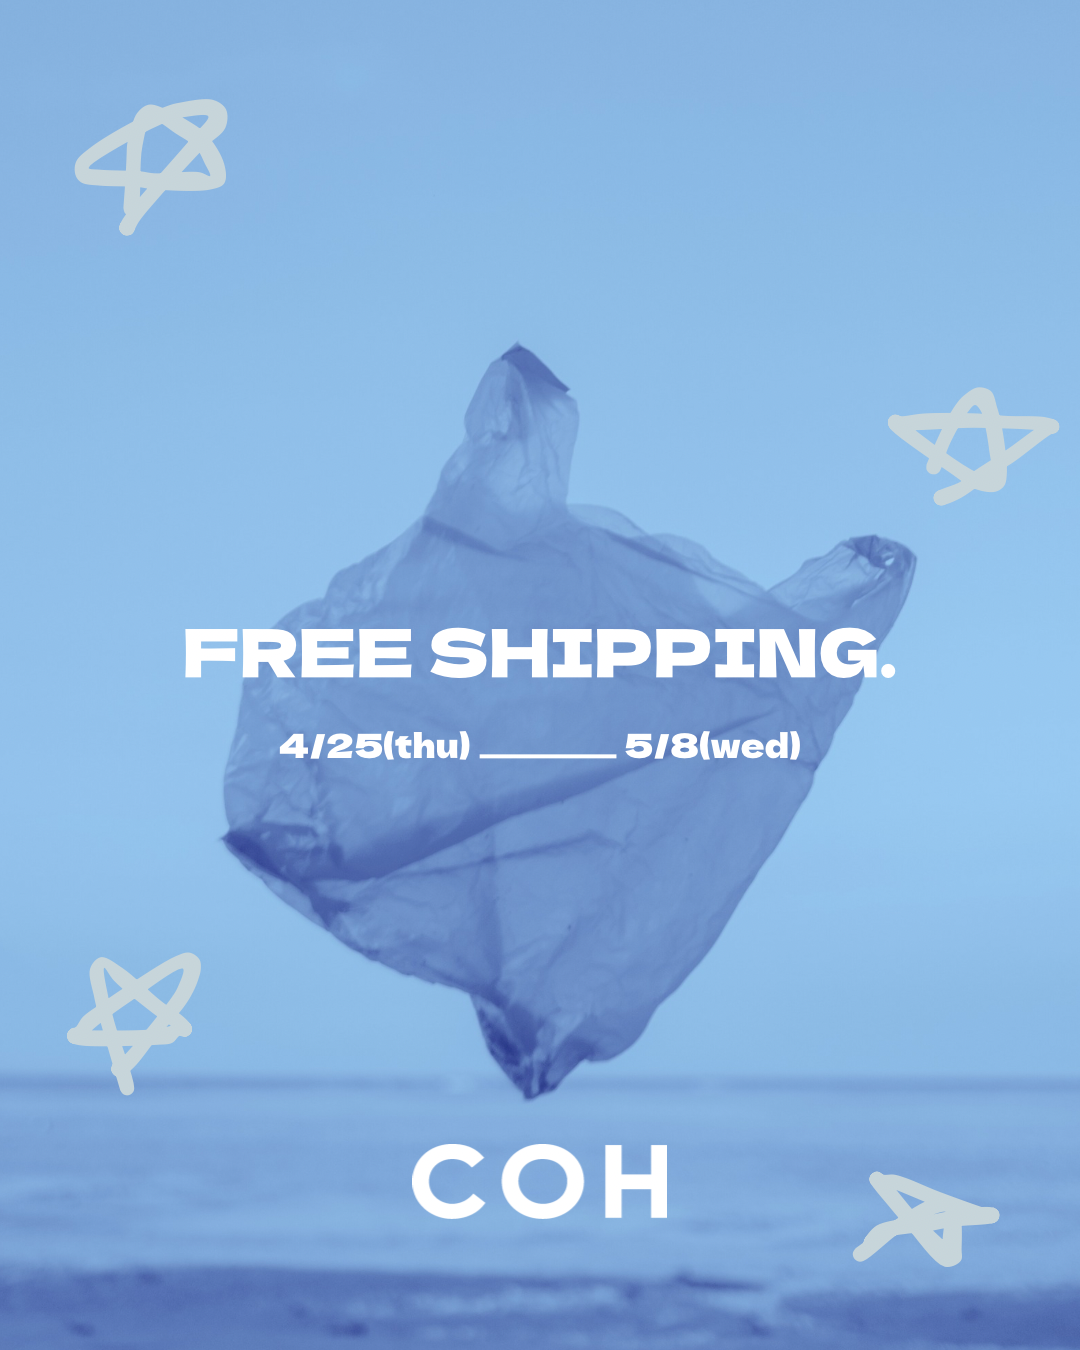 information / FREE SHIPPING